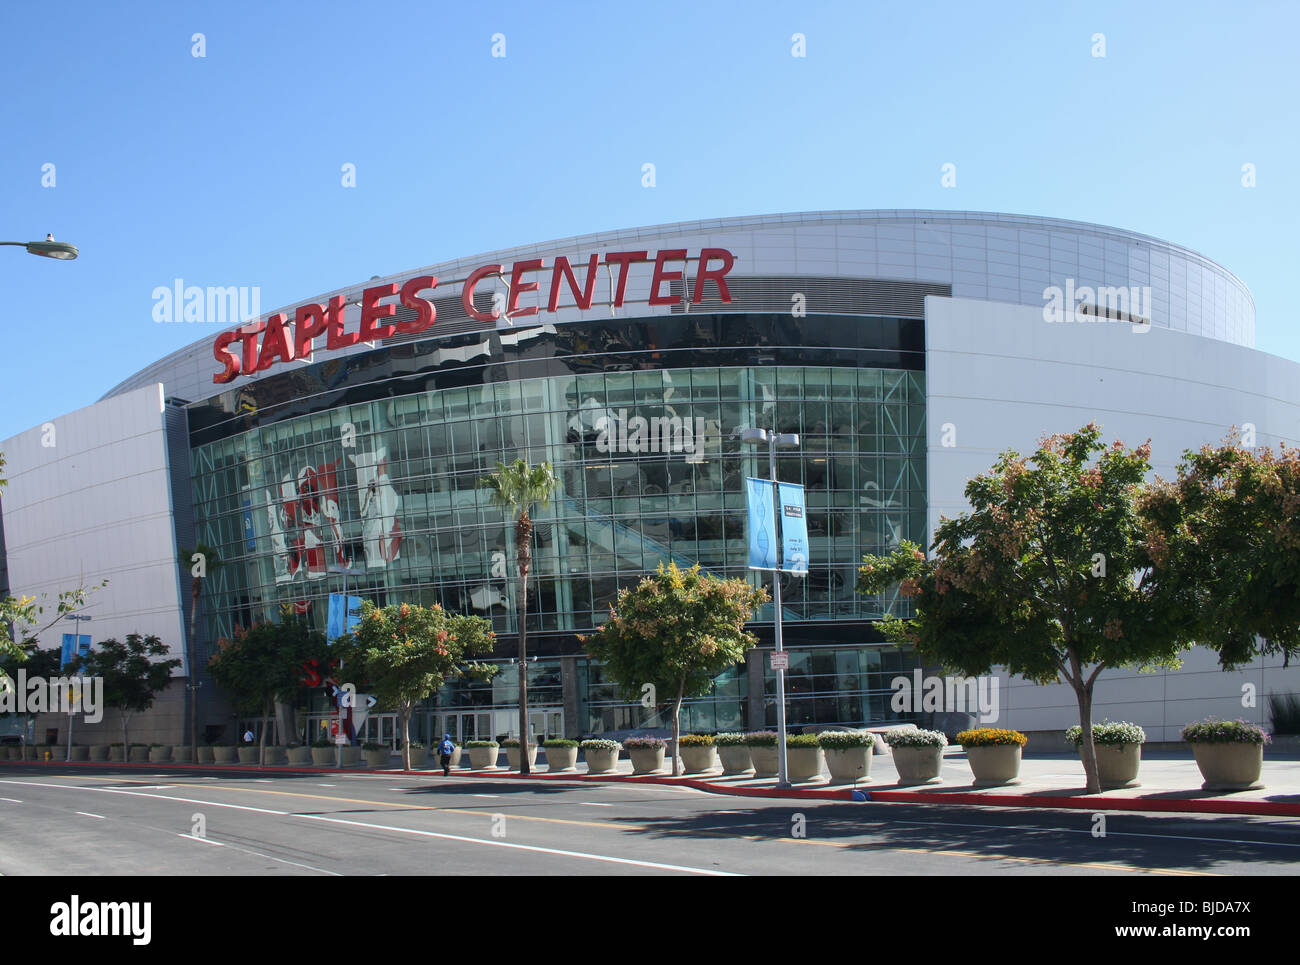 exterior of downtown basketball arena Staples Center Los Angeles  October 2007 Stock Photo